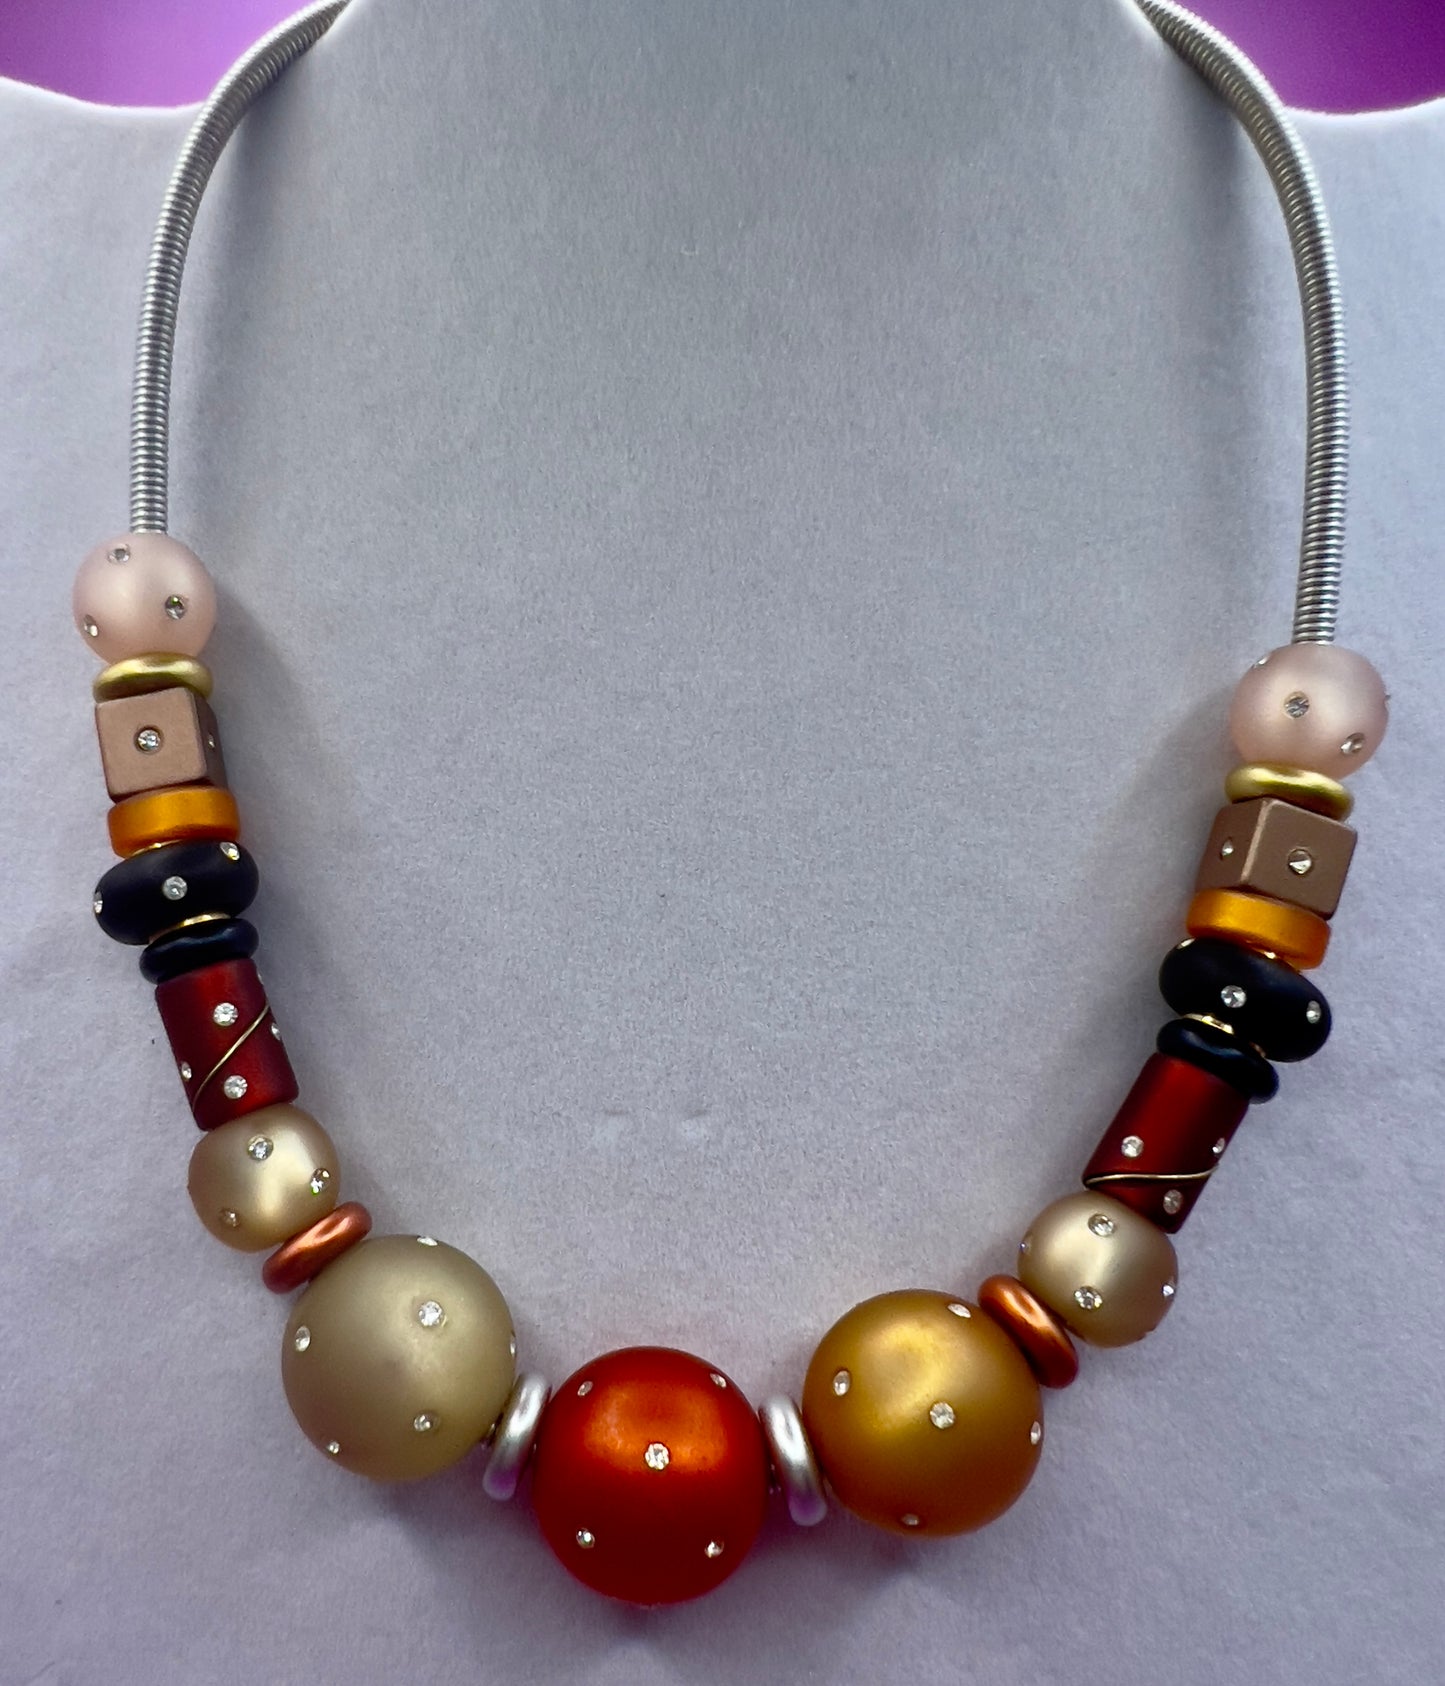 Vintage Necklace with Matte Acrylic Beads and Rhinestones